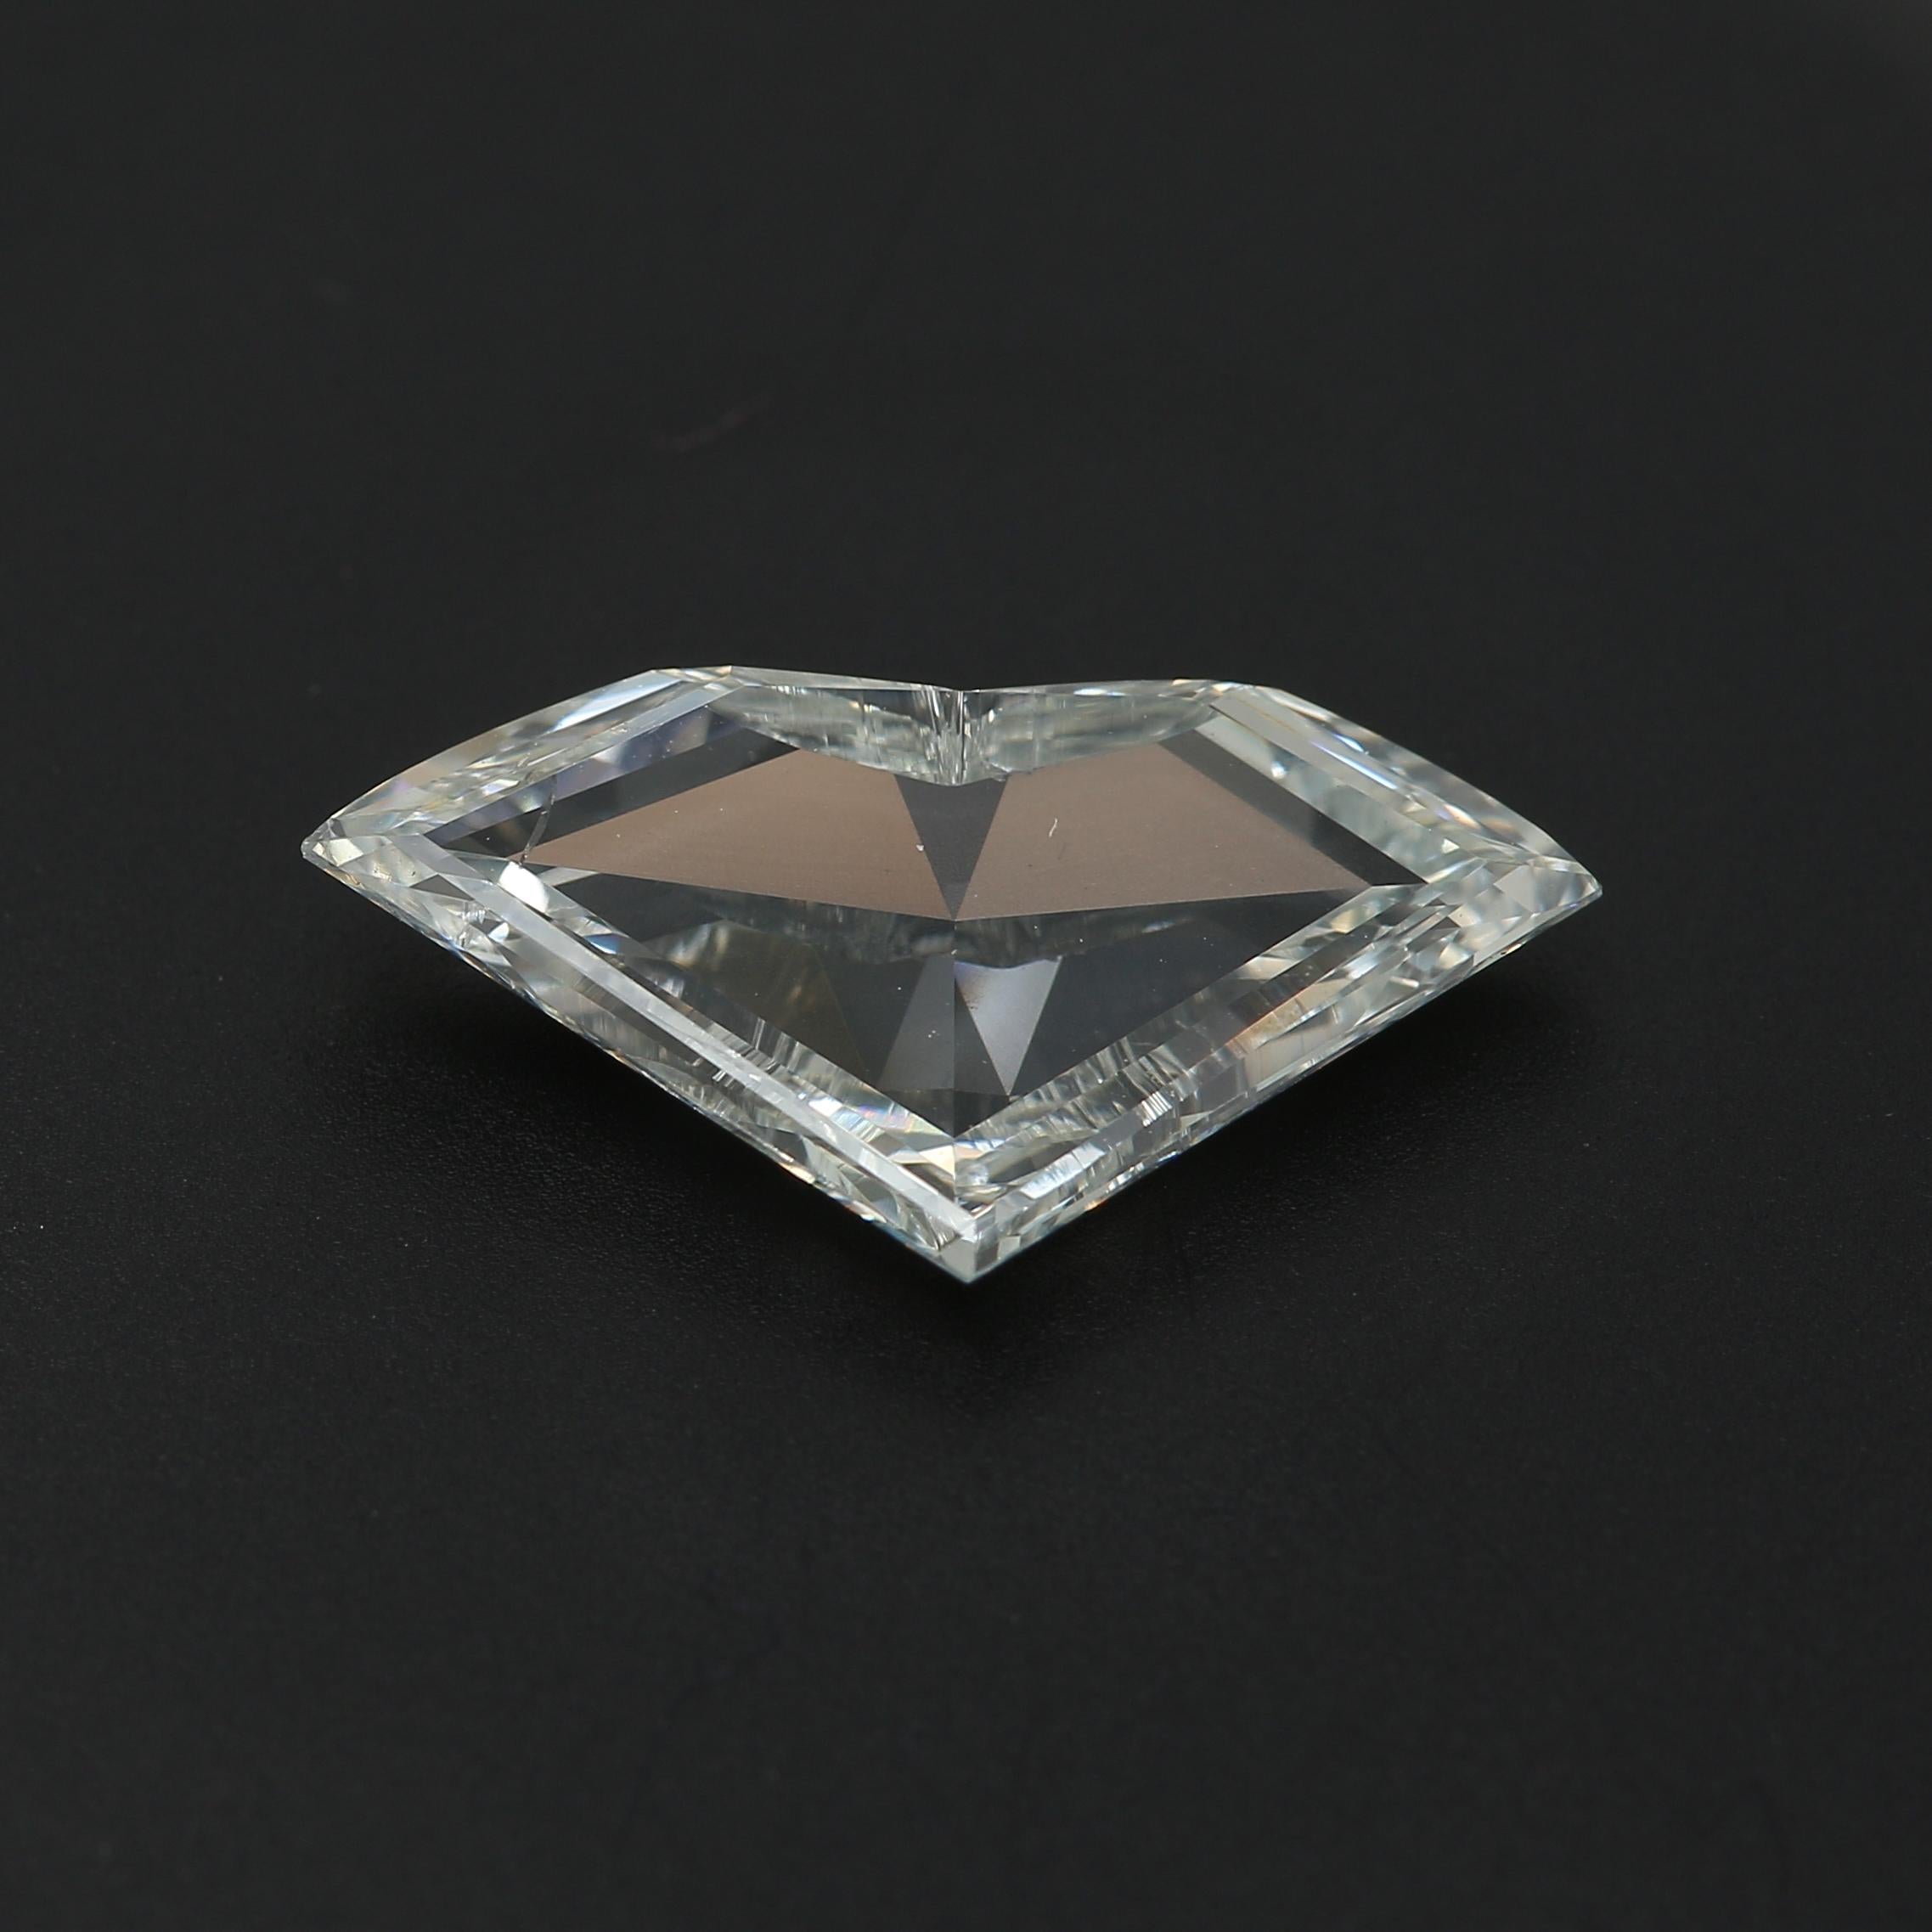 *100% NATURAL FANCY COLOUR DIAMOND*

✪ Diamond Details ✪

➛ Shape: Modified Shield Step Cut
➛ Colour Grade: G
➛ Carat: 2.24
➛ Clarity: I1
➛ GIA Certified 

^FEATURES OF THE DIAMOND^

This 2.24-carat diamond typically exhibits a good balance between